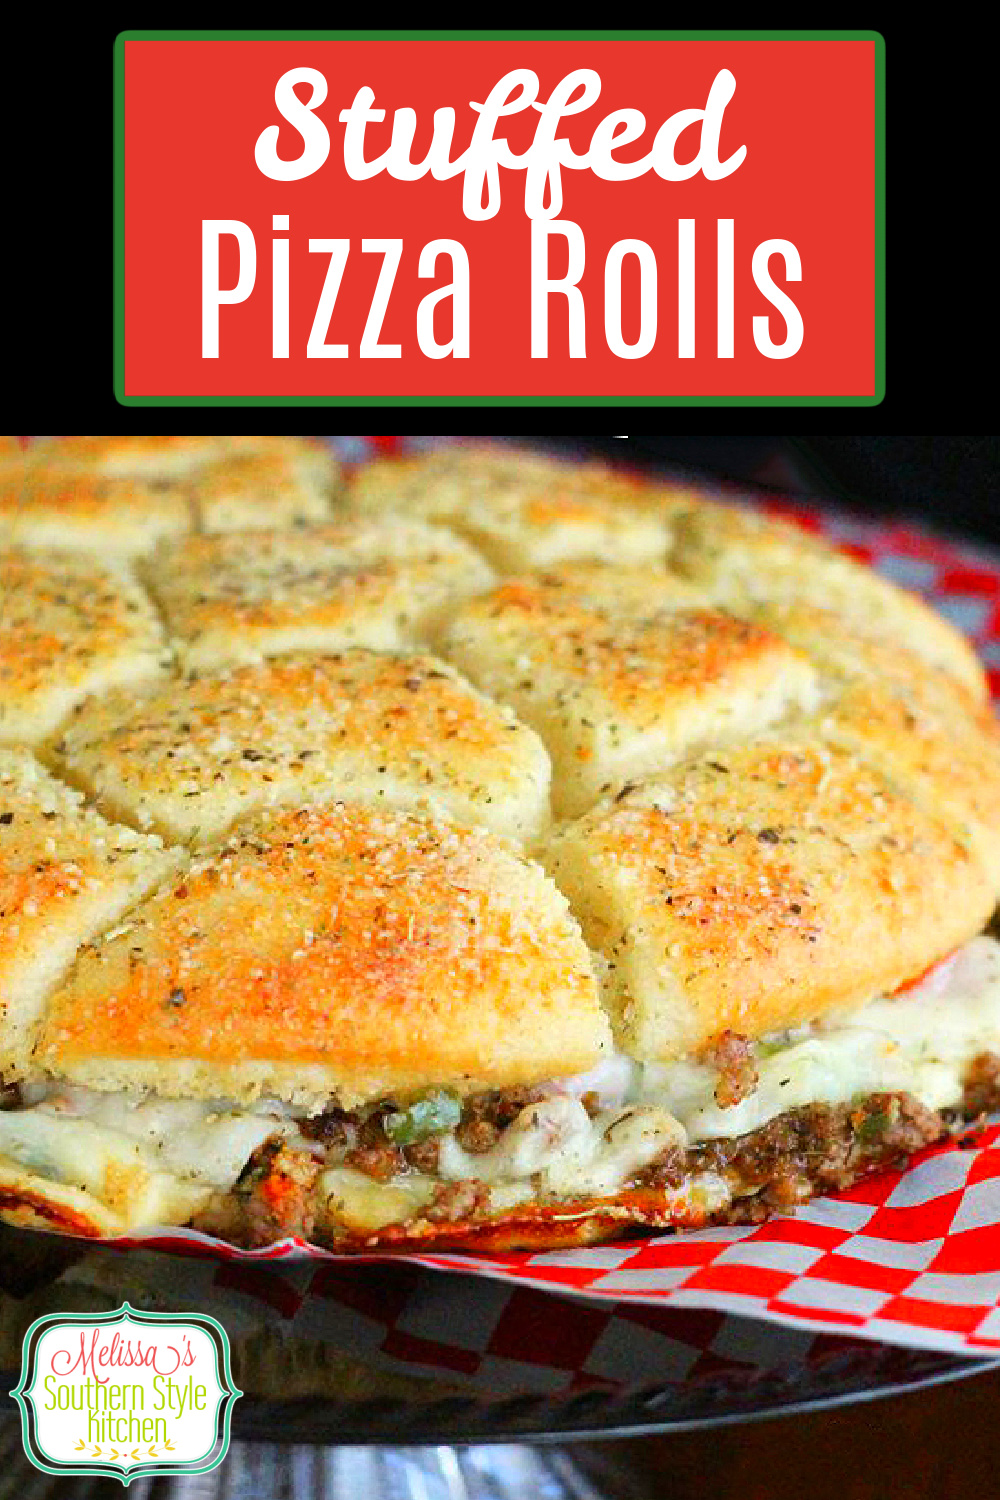 Pull apart and enjoy these shareable ooey gooey Supreme Pizza Rolls #pizza #pizzarolls #snacks #appetizers #rolls #supremepizza #pizzarecipes #southernrecipes #gamedayrecipes #footballfood via @melissasssk